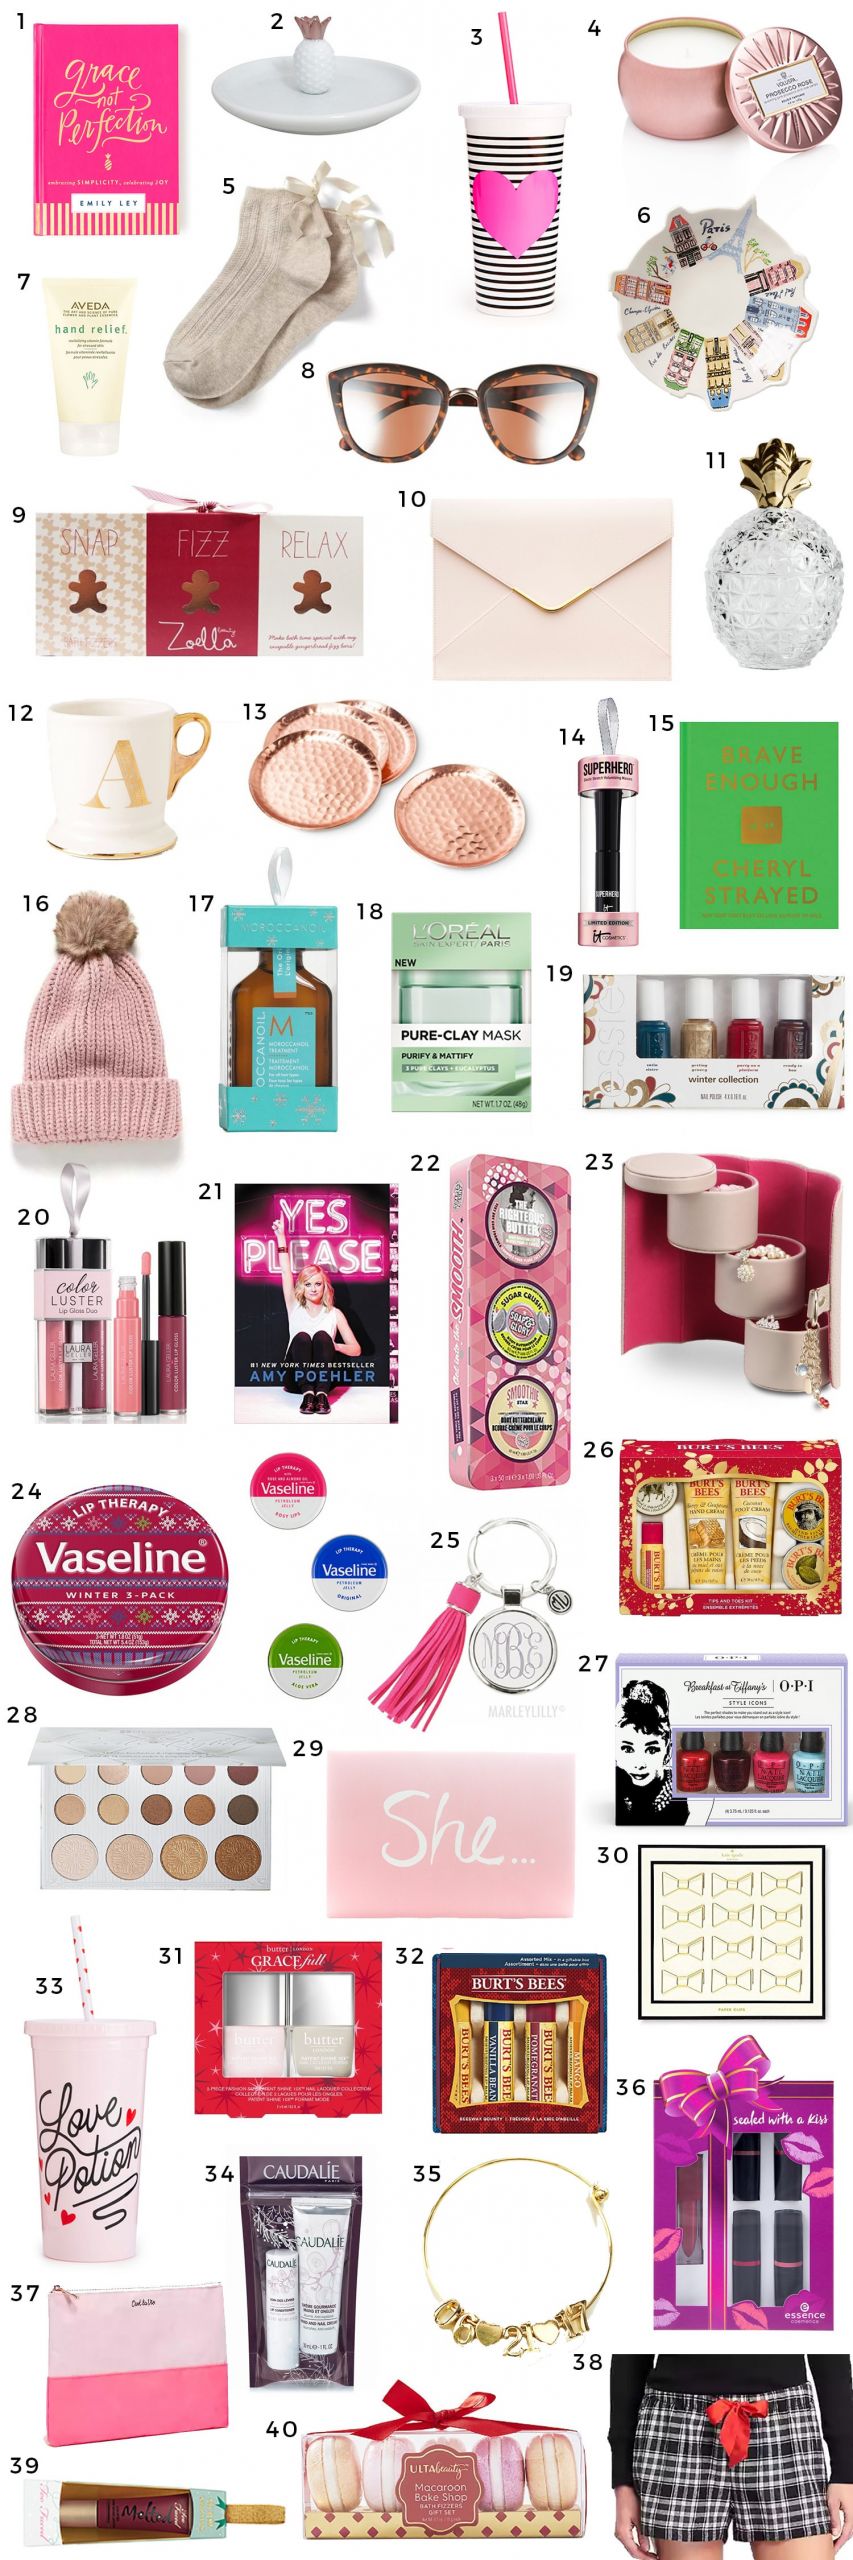 Great Holiday Gift Ideas
 The Best Christmas Gift Ideas for Women Under $15